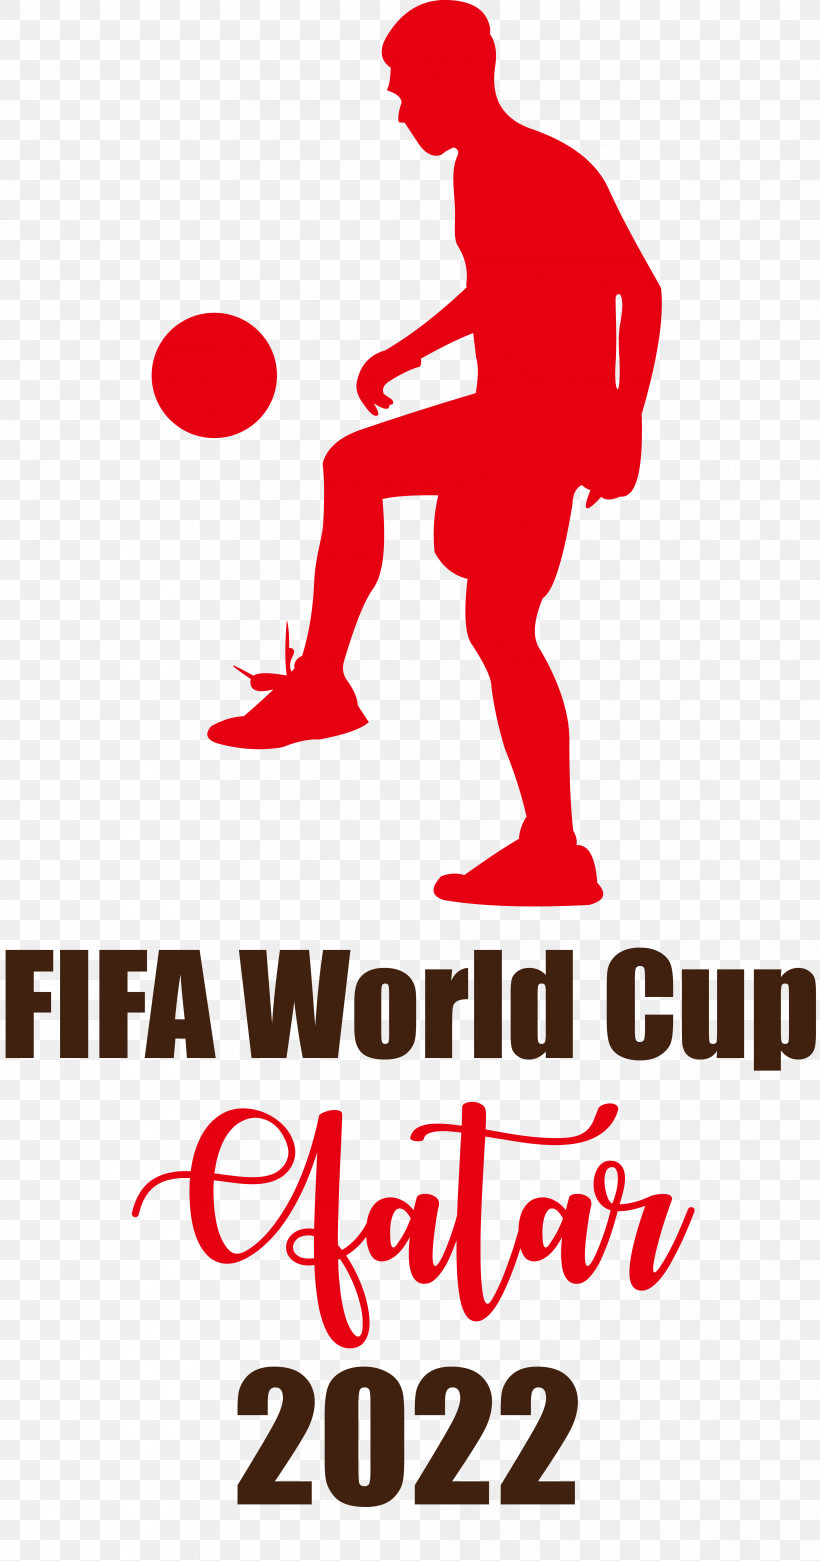 Fifa World Cup World Cup Qatar, PNG, 3839x7309px, Fifa World Cup, World Cup Qatar Download Free